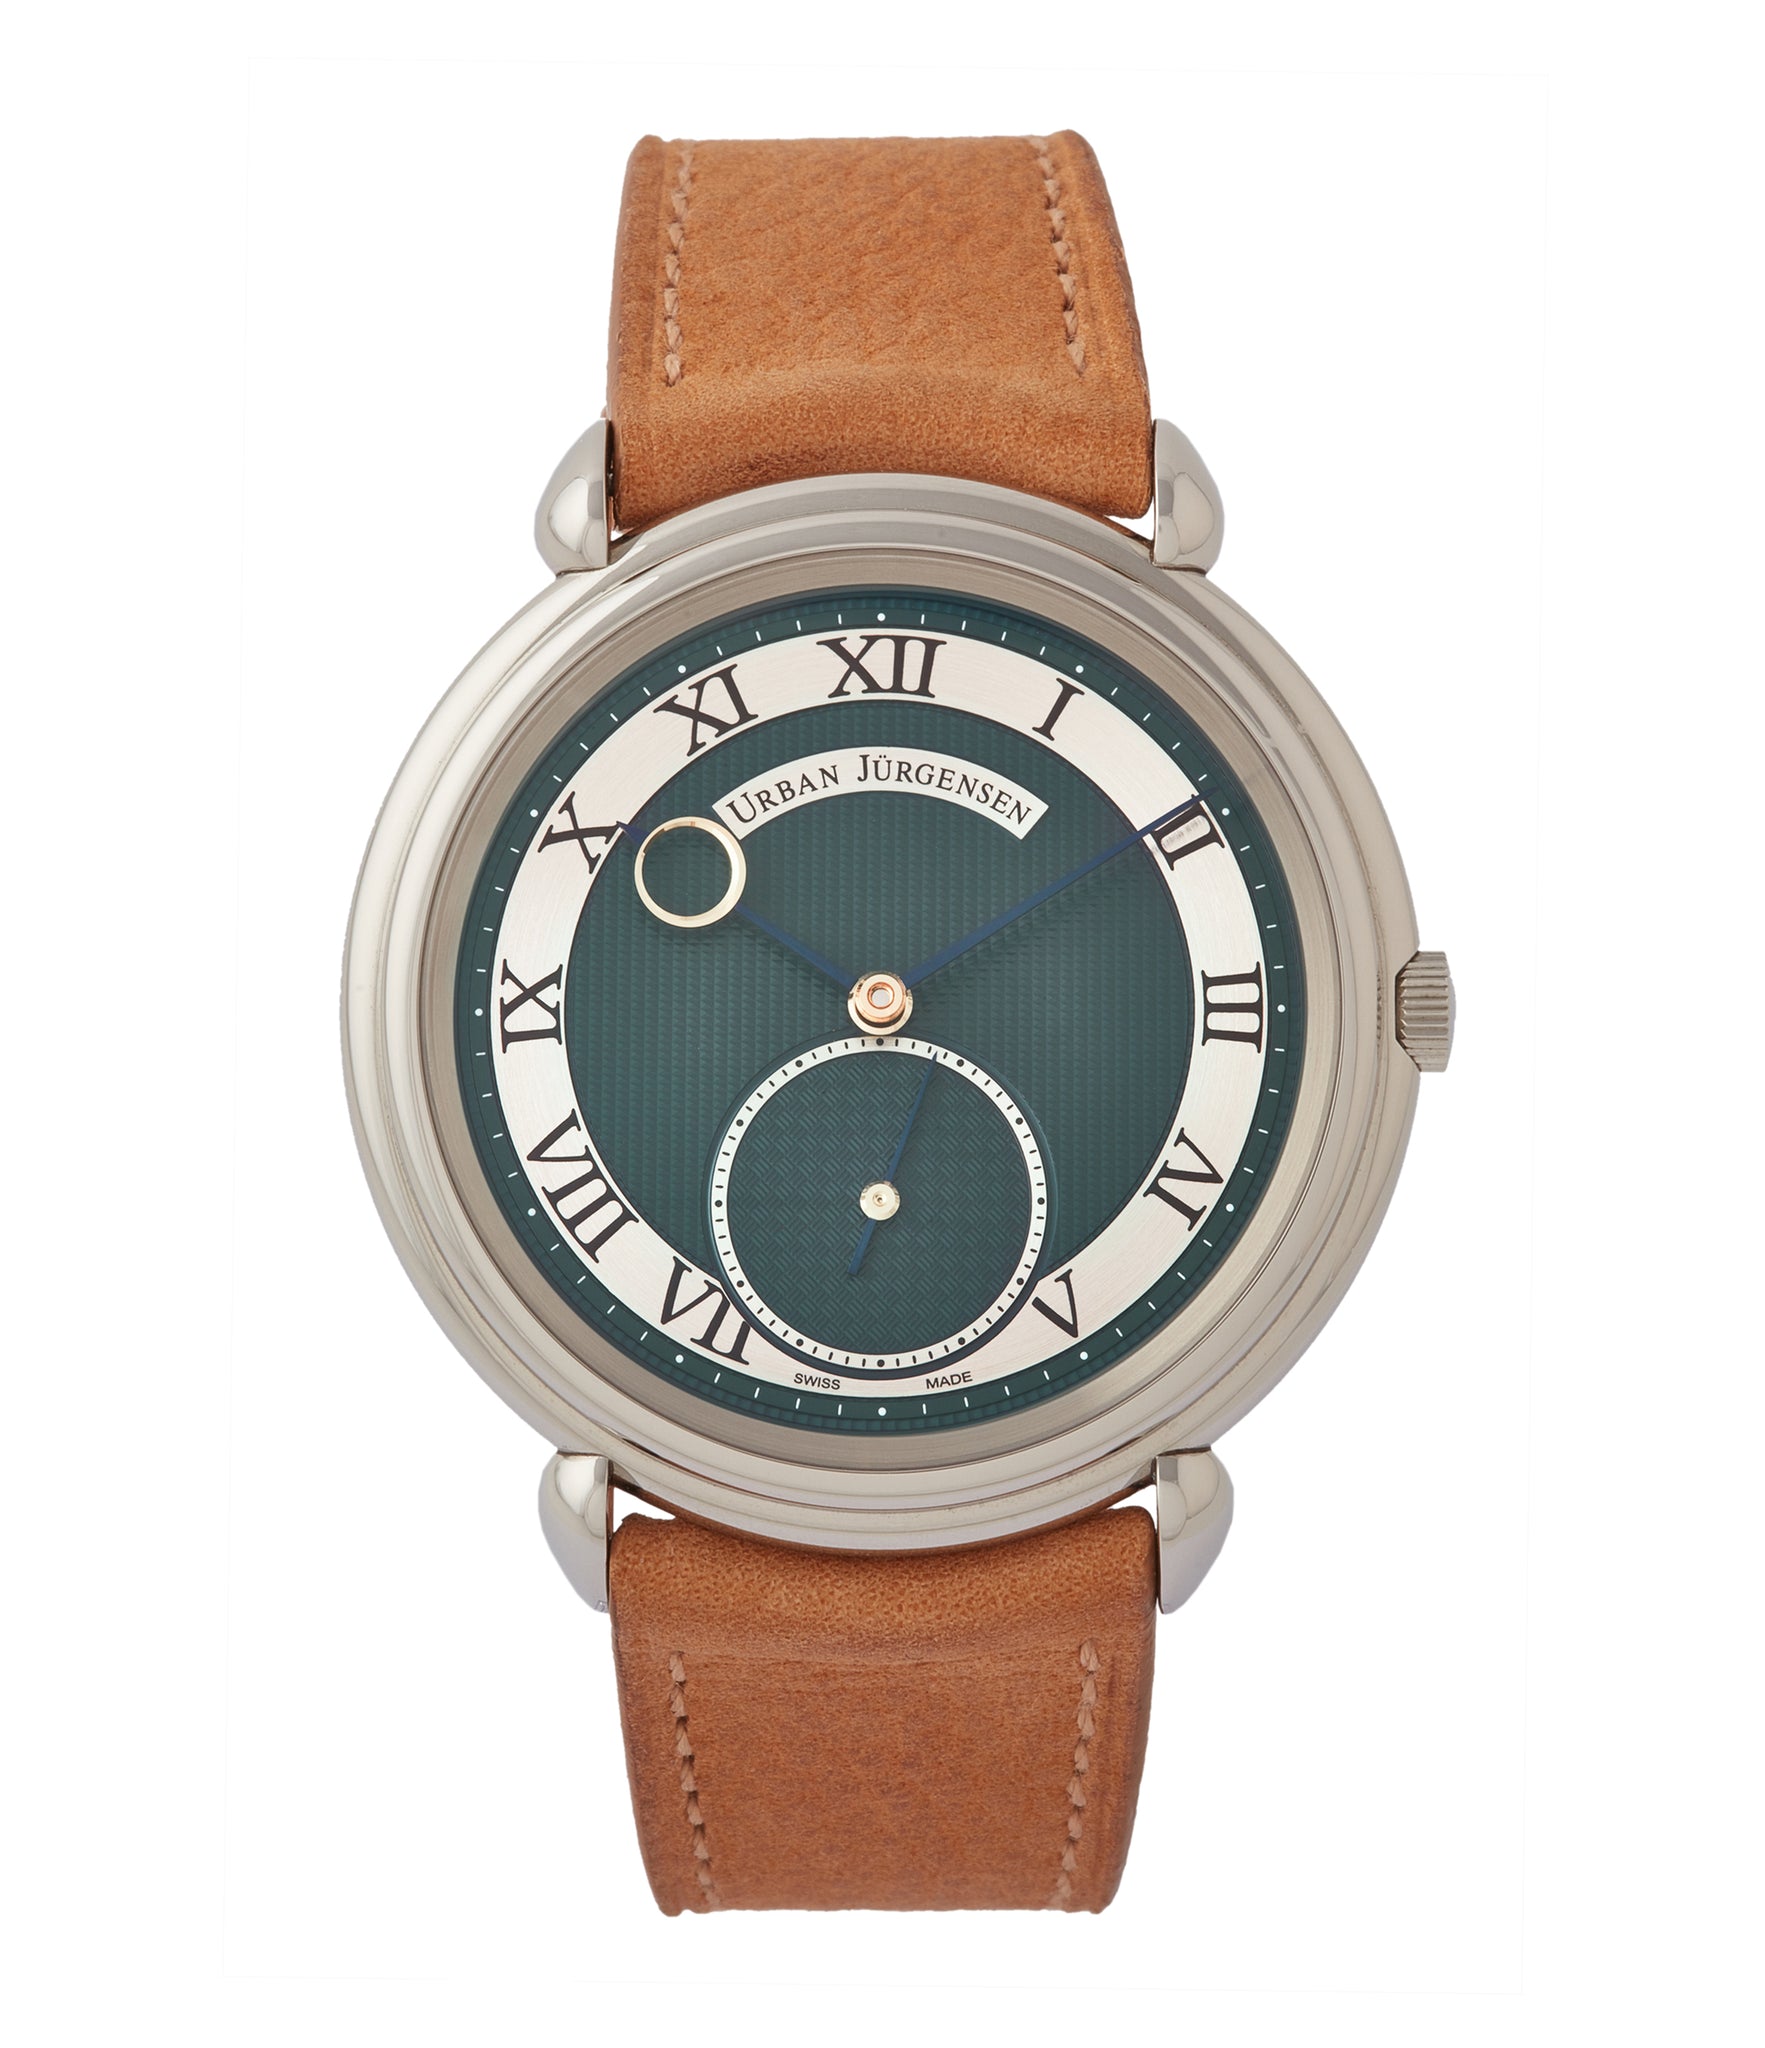 Buy London Limited Edition Urban Jürgensen British racing green dial steel time-only dress watch for sale exclusively at A Collected Man London